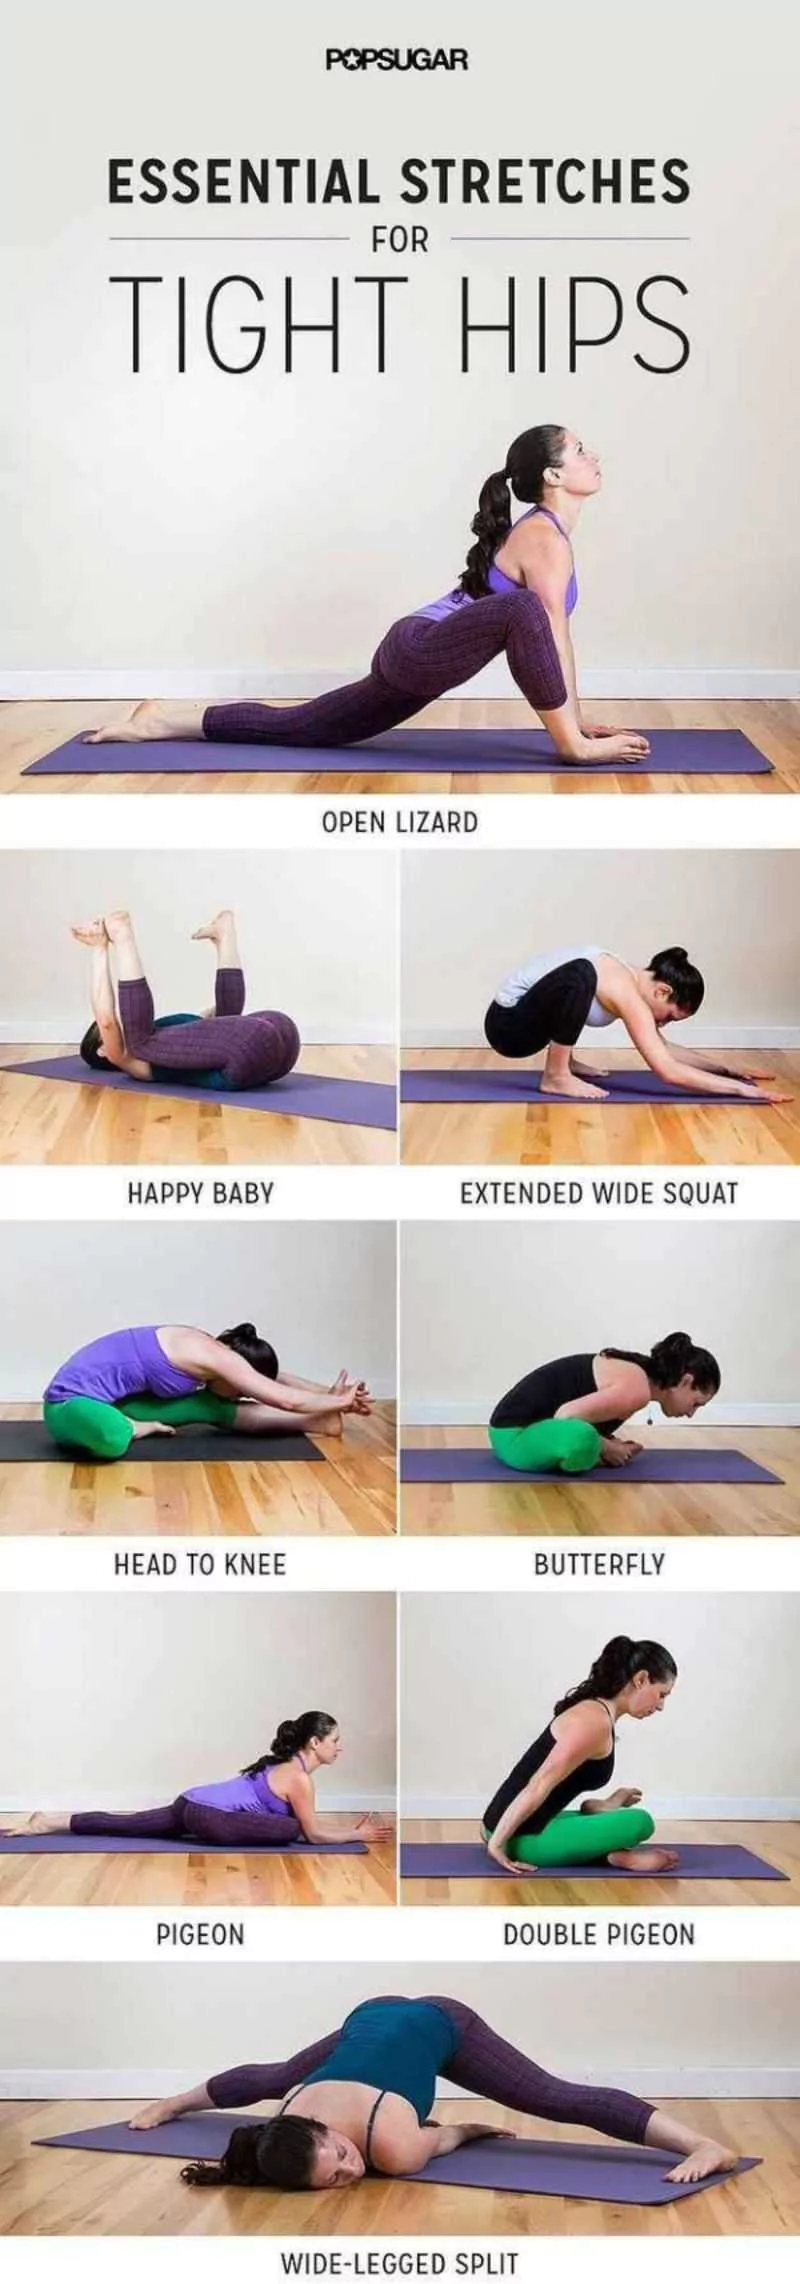 Essential Stretches For Tight Hips